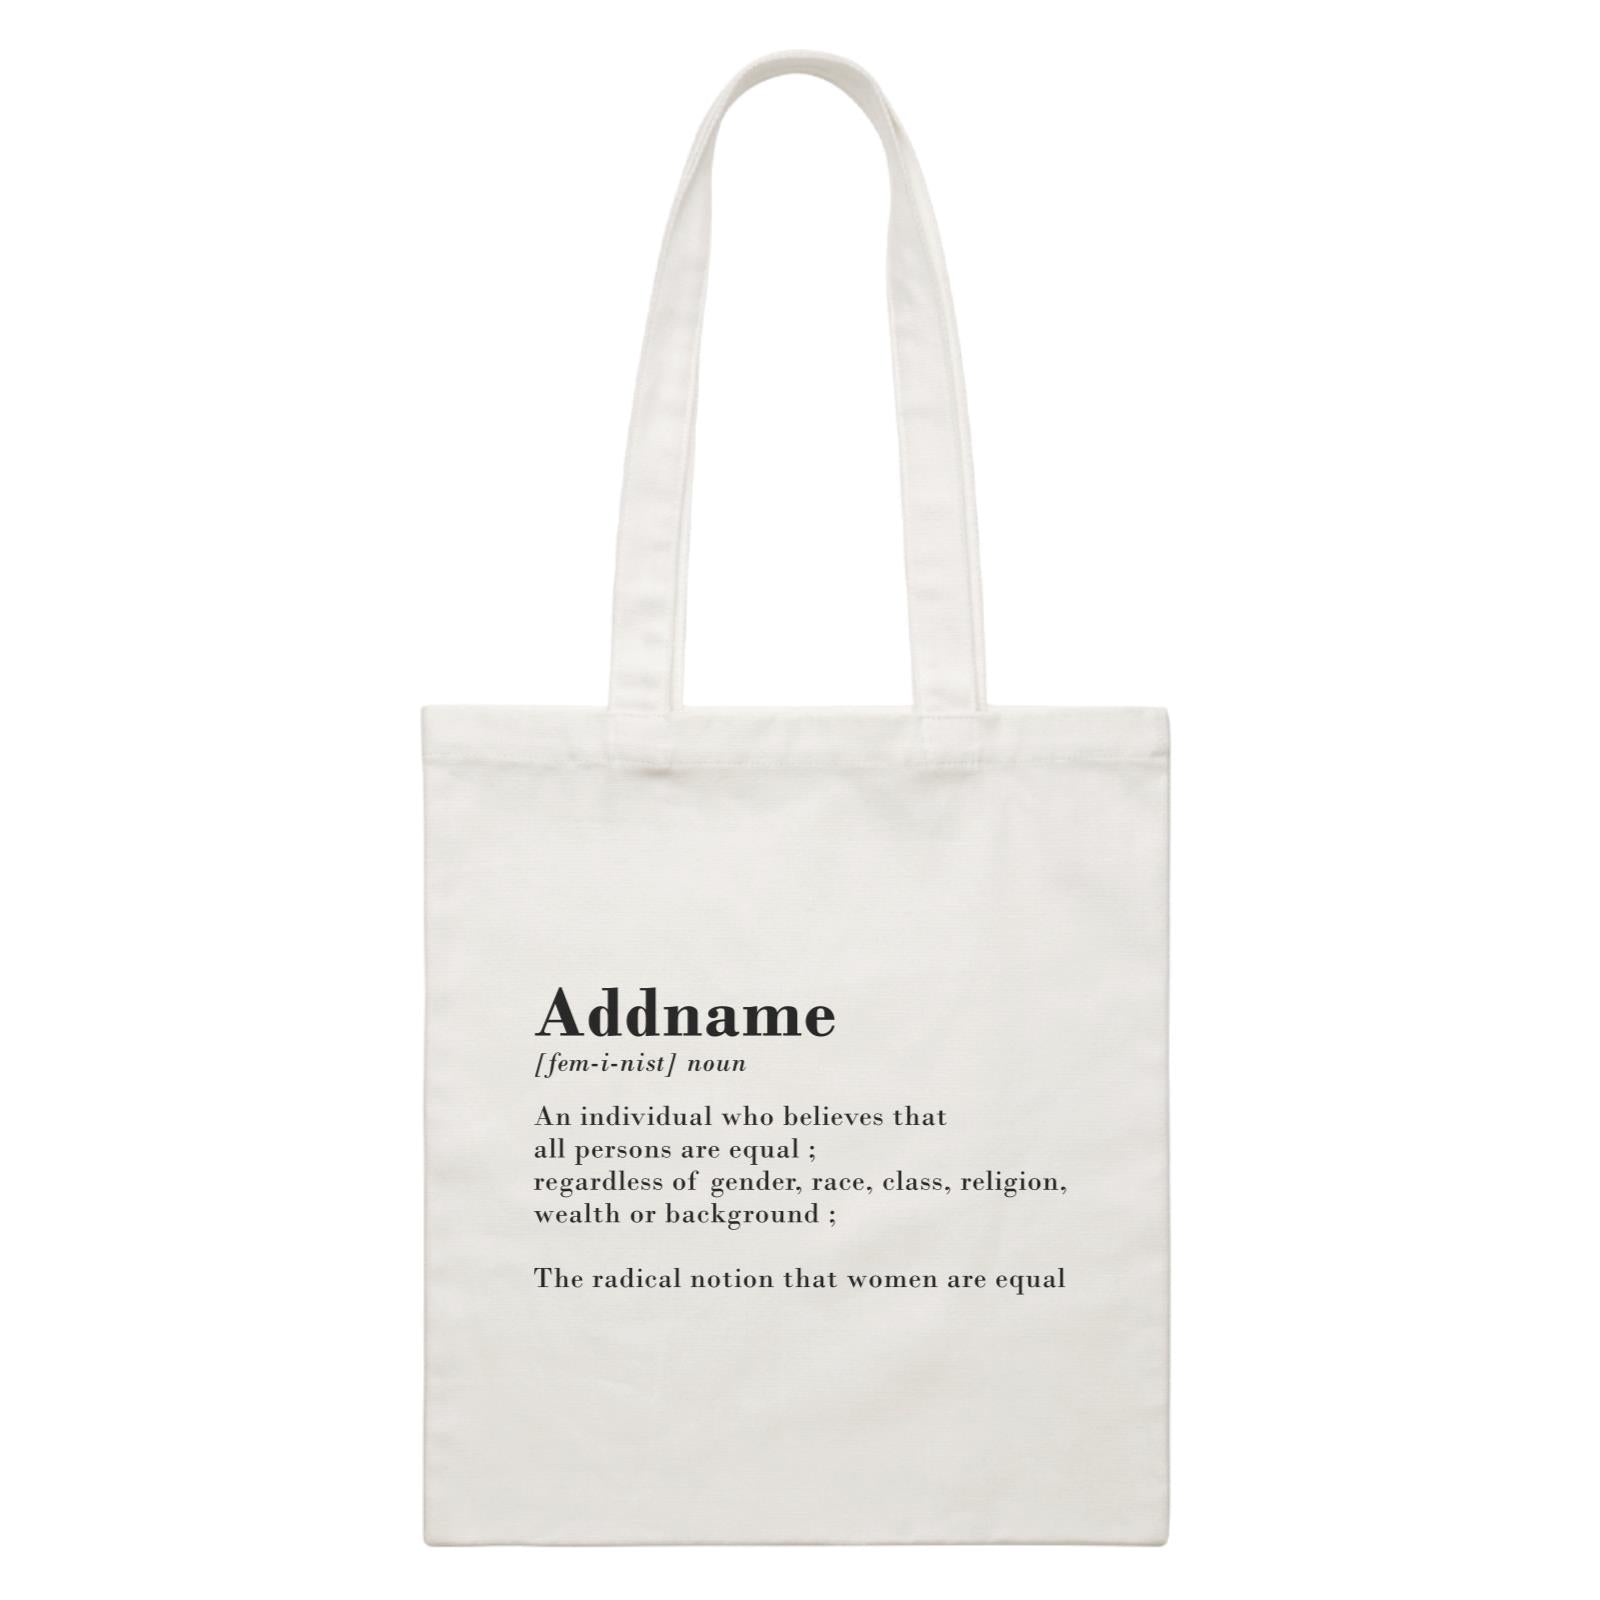 Best Friends Quotes Addname Feminist Noun Meaning White Canvas Bag